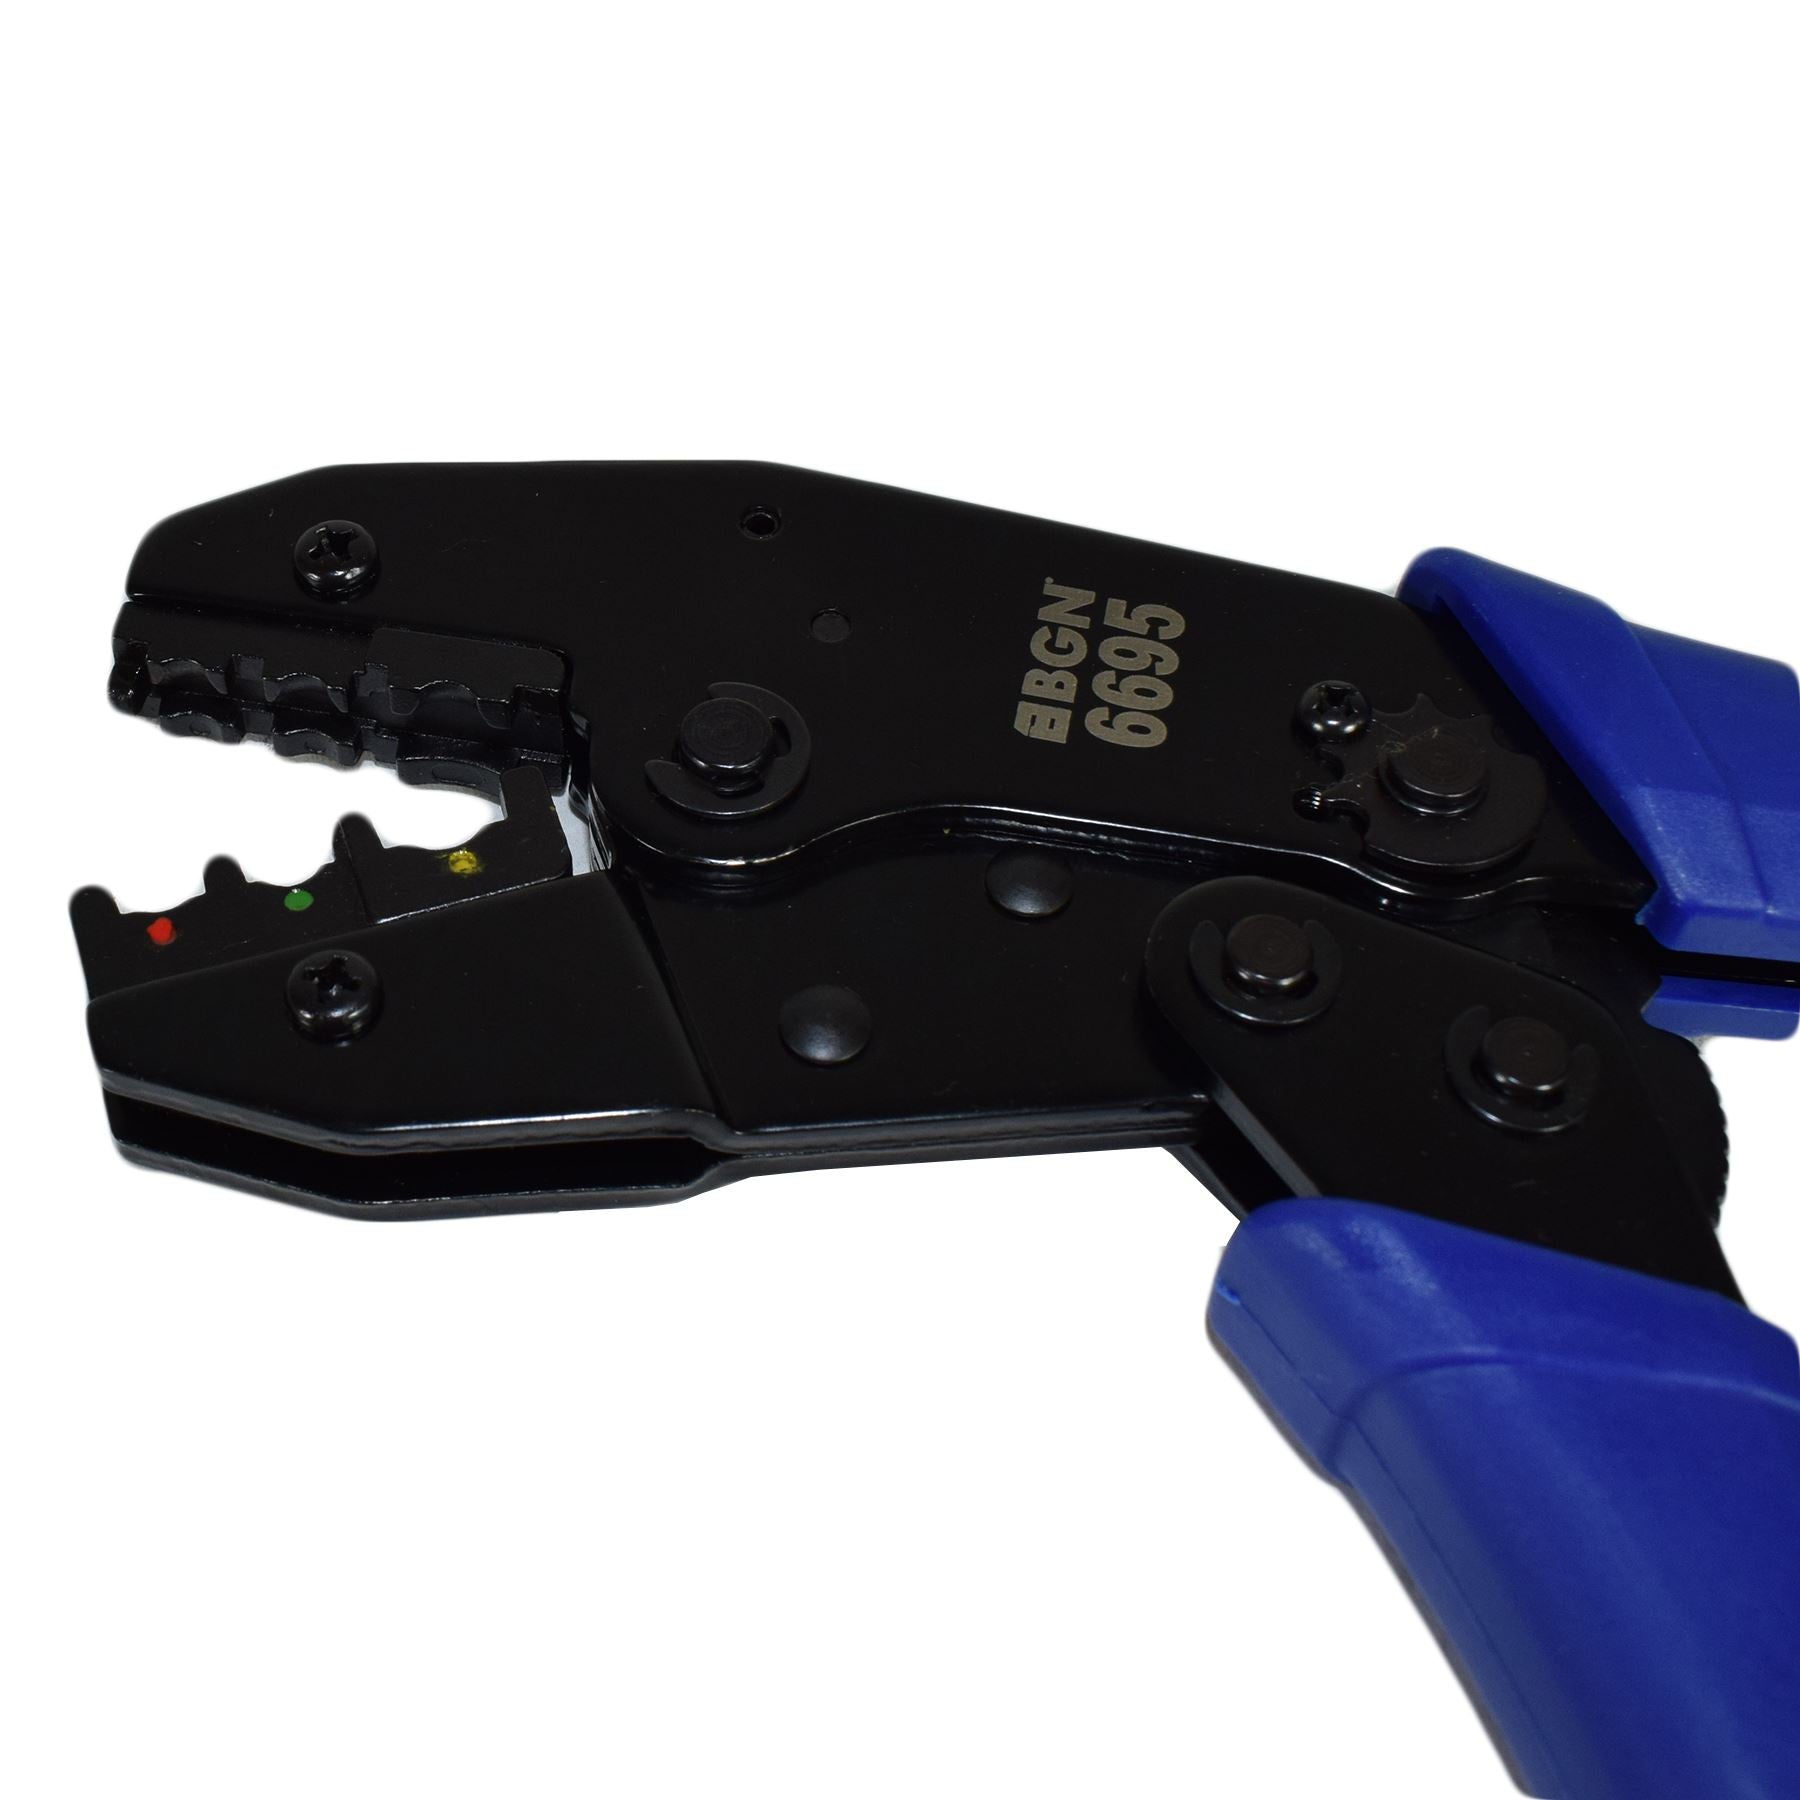 Electrical Ratchet Crimping Crimp Tool Pliers For Insulated Terminals 0.5 - 6mm